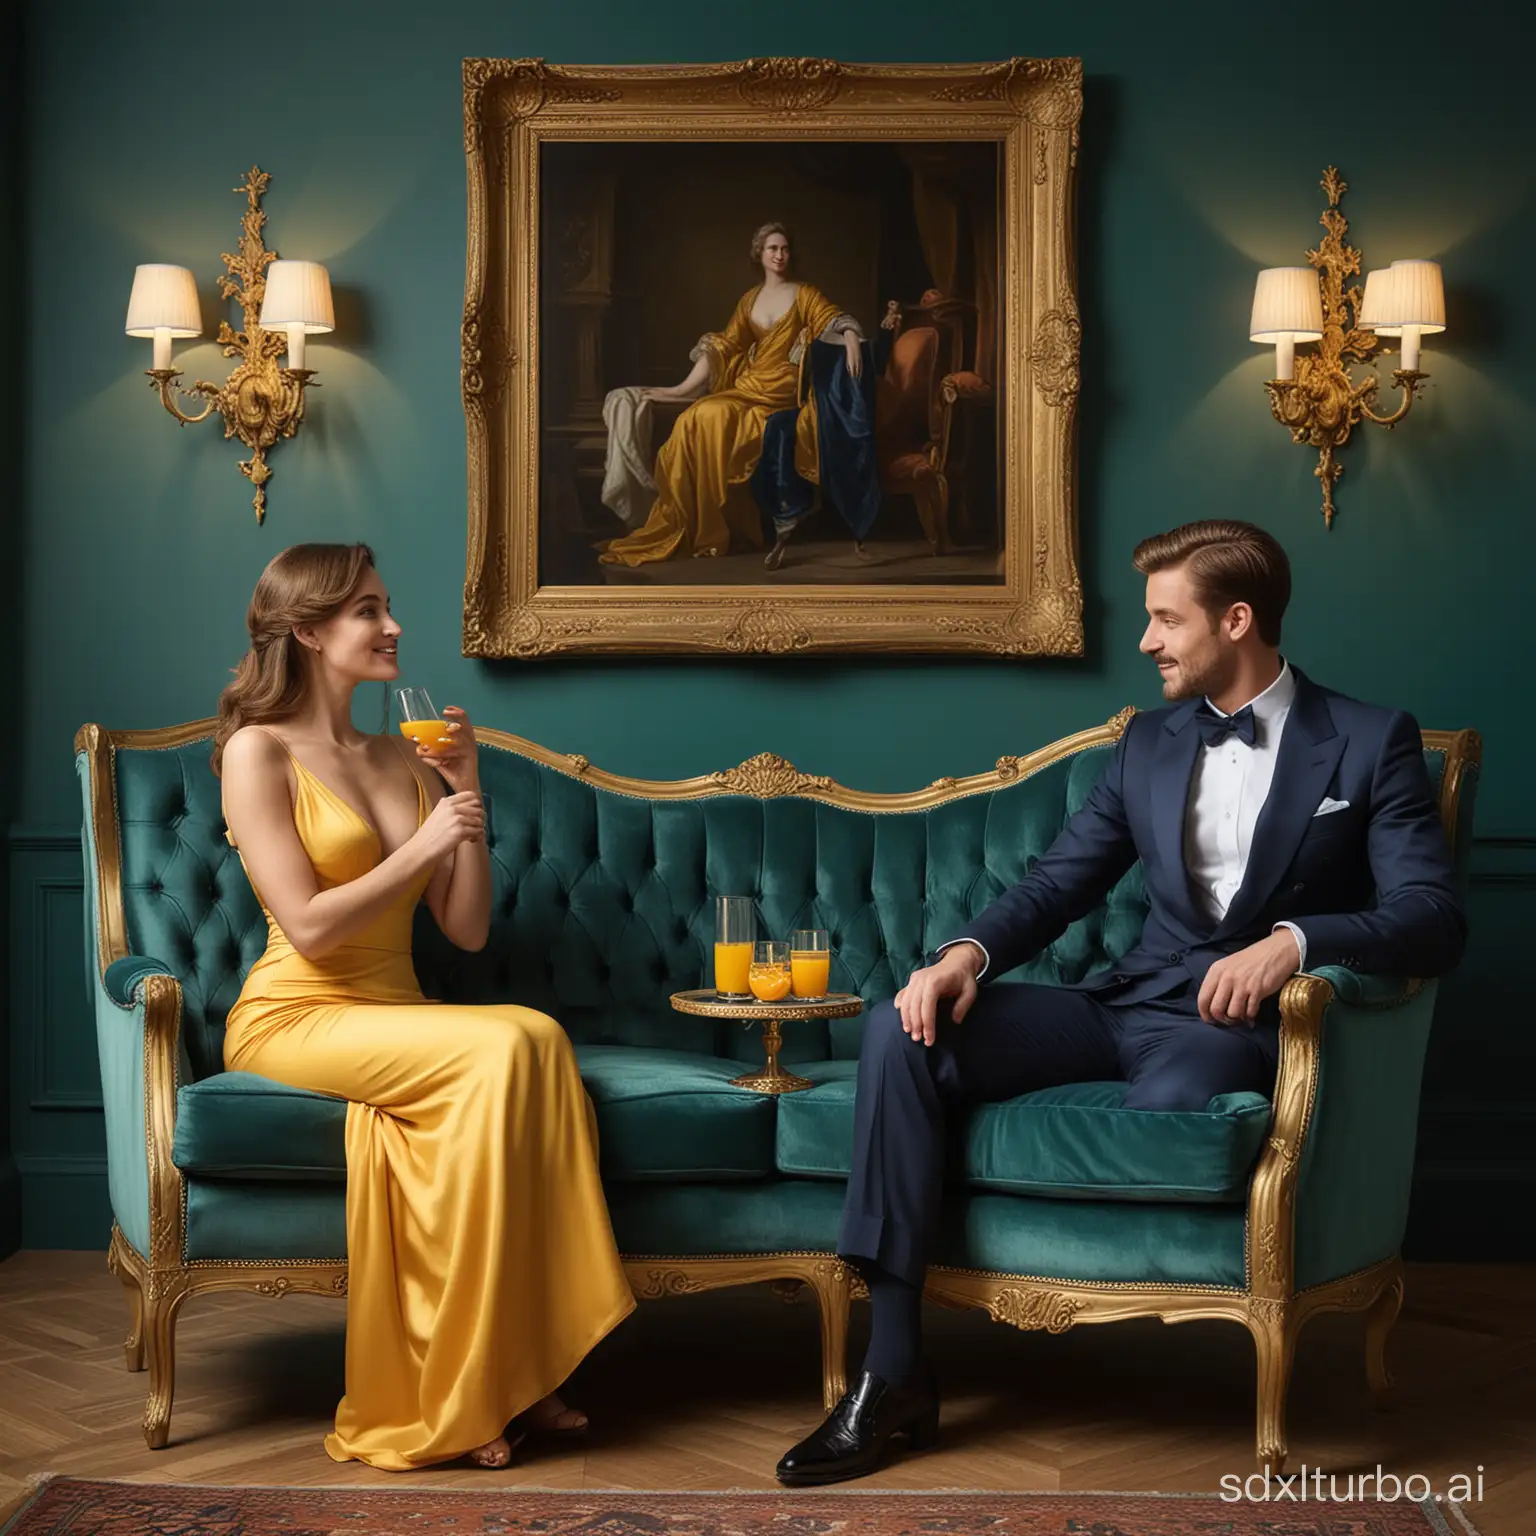 Create an image depicting an intimate scene in an elegant blue room in the corner of the room, with 2 people, where on the left sits a man in a navy blue suit and on the right a woman in a golden yellow dress. Each is holding a glass of orange juice, their expressions reflecting shared laughter and warmth. Both are seated on emerald-green upholstered armchairs. Make sure that the clothes, posture and expressions of the figures accurately convey elegance and joviality. Emphasize the opulence of the chairs and the room's regal ambience.